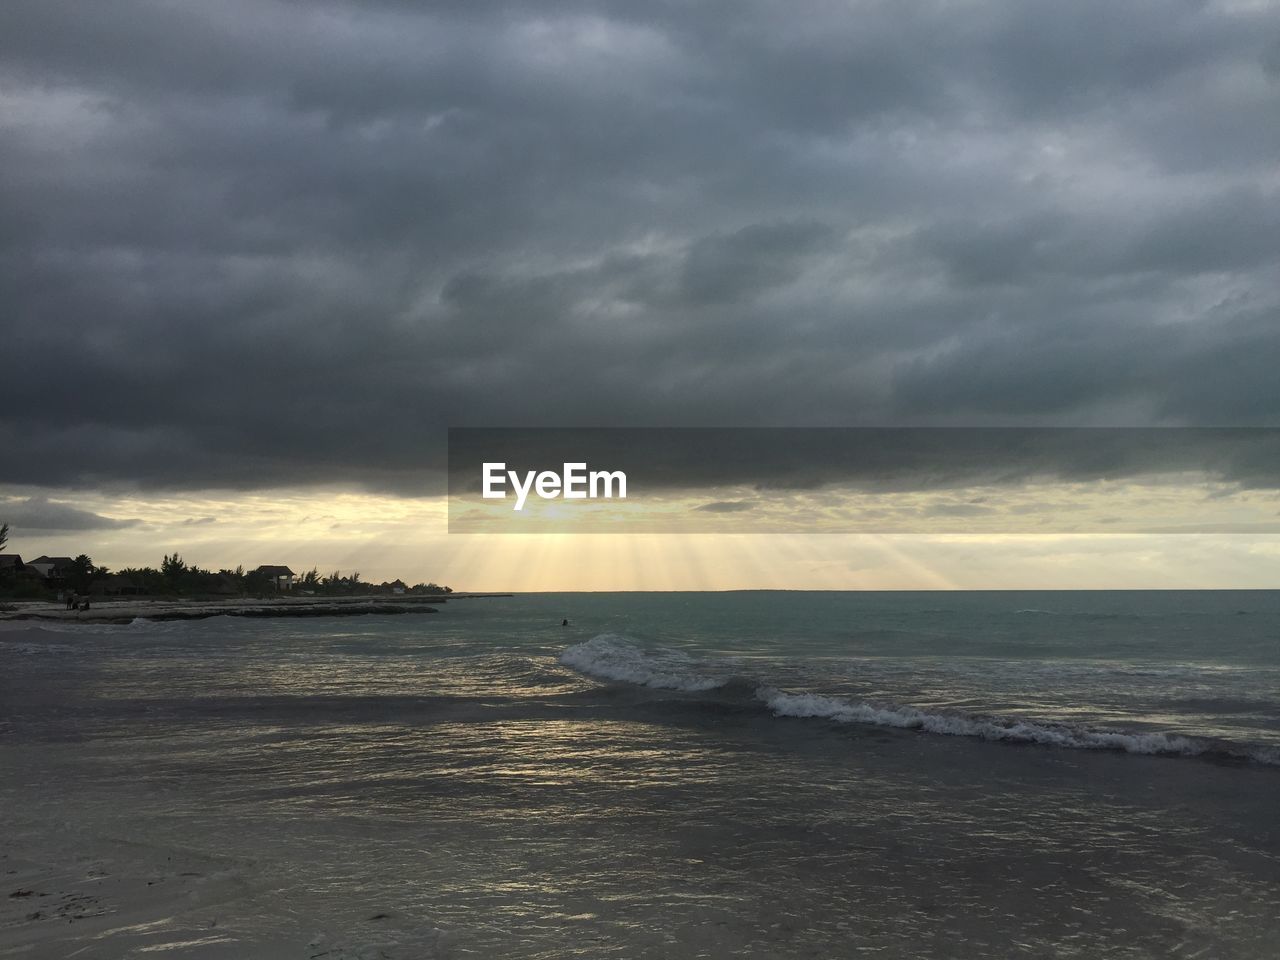 SCENIC VIEW OF SEA AGAINST CLOUDY SKY